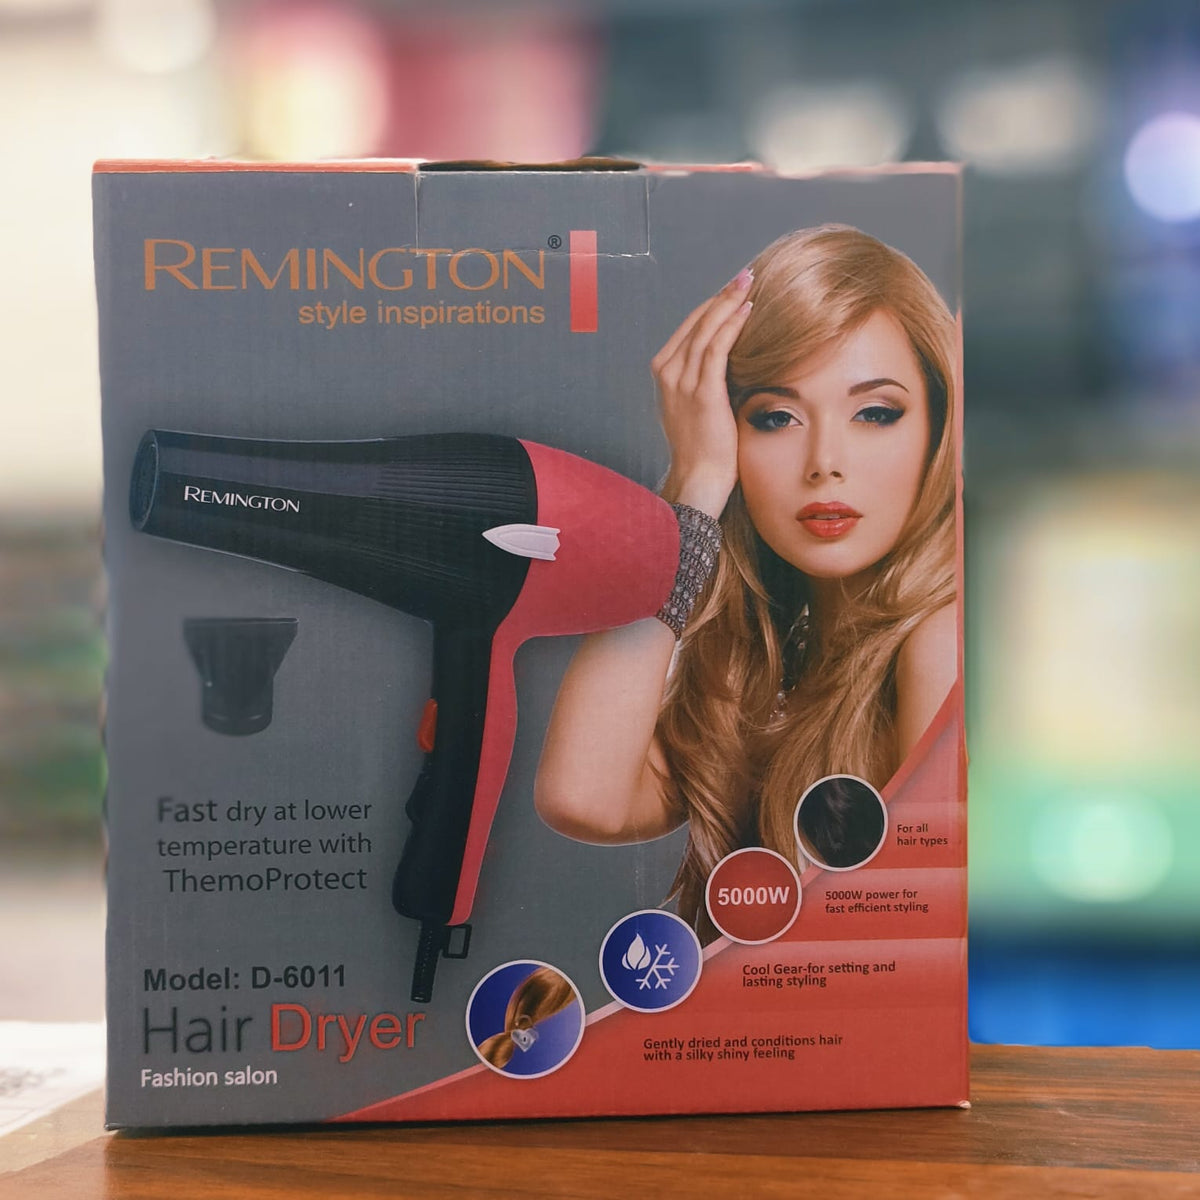 Remington Hair Dryer Best Performance BEST QUALITY Fast Dry At Lower Temperature